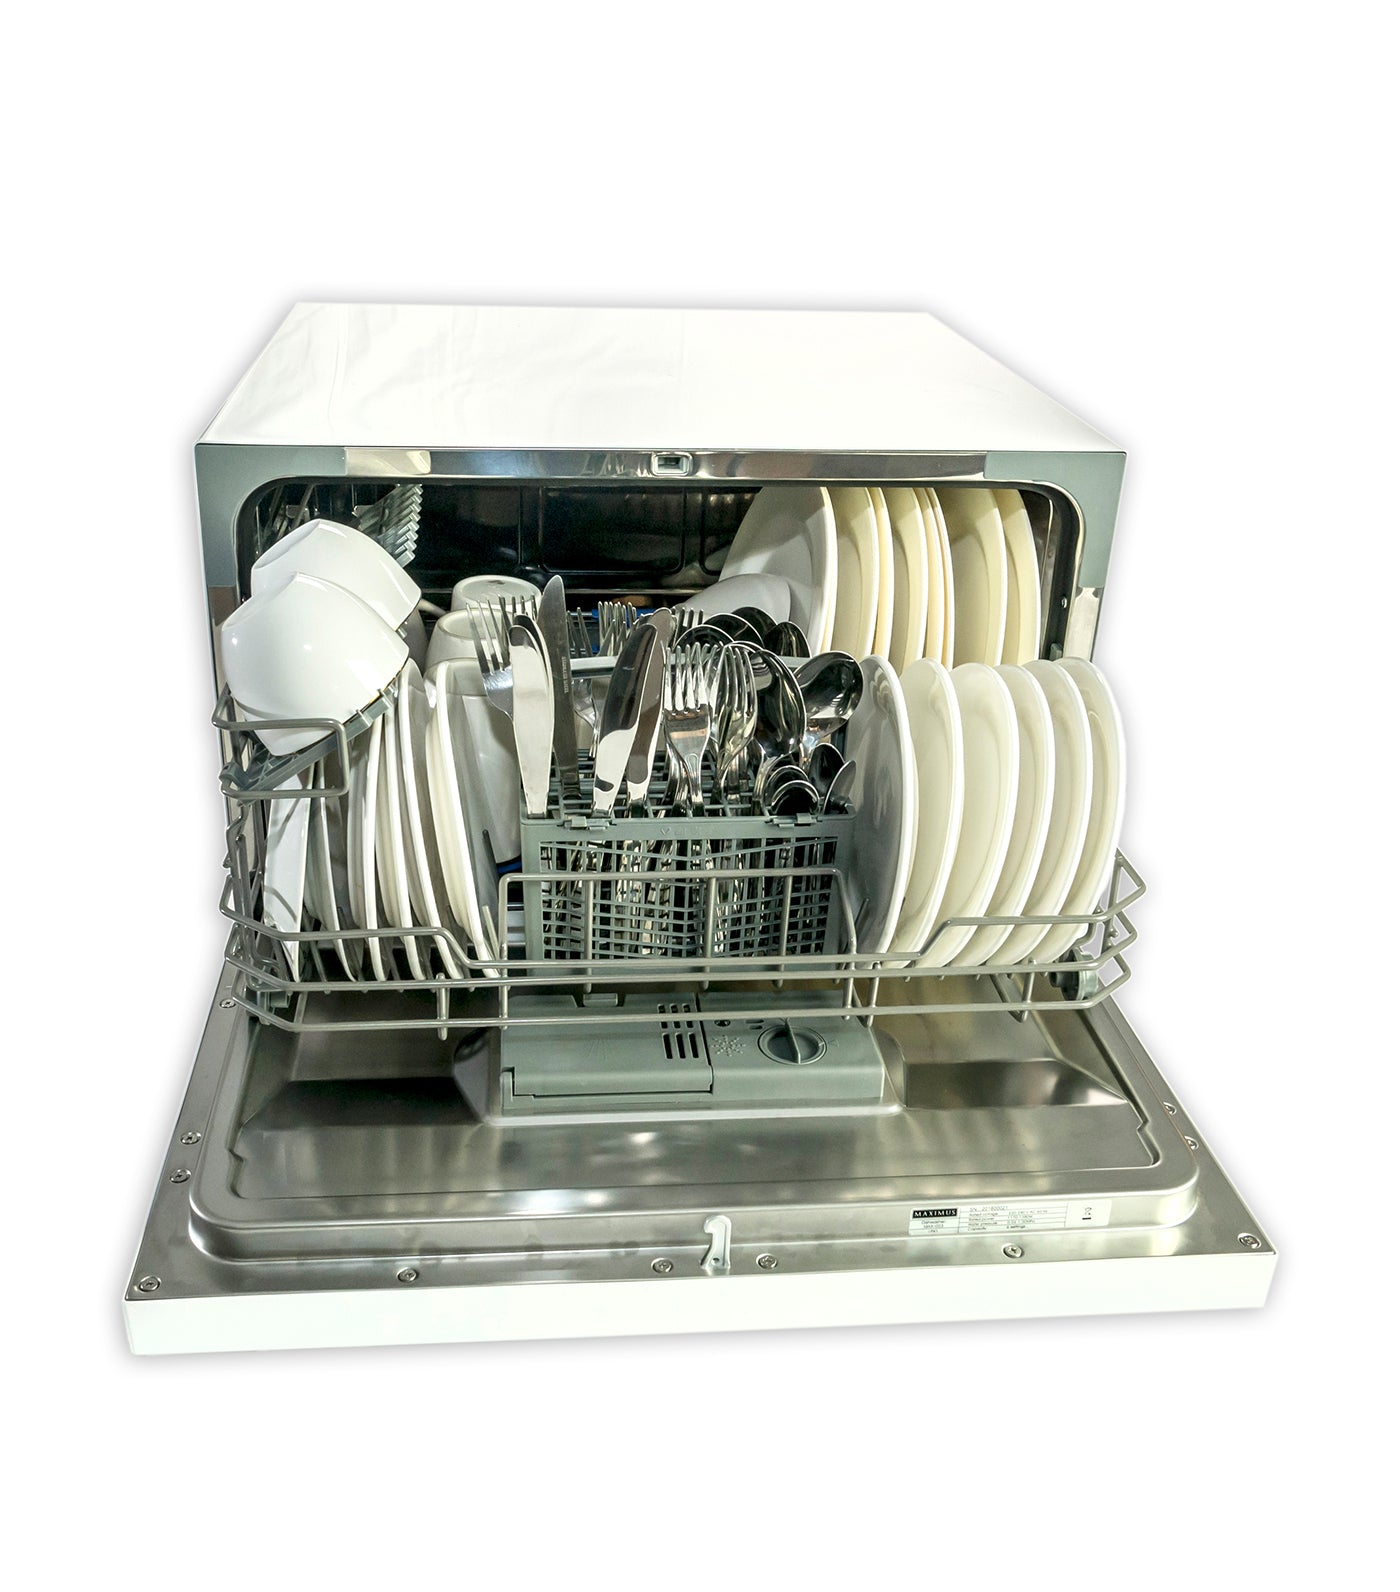 Maximus Tabletop Dishwasher White with Wood Handle